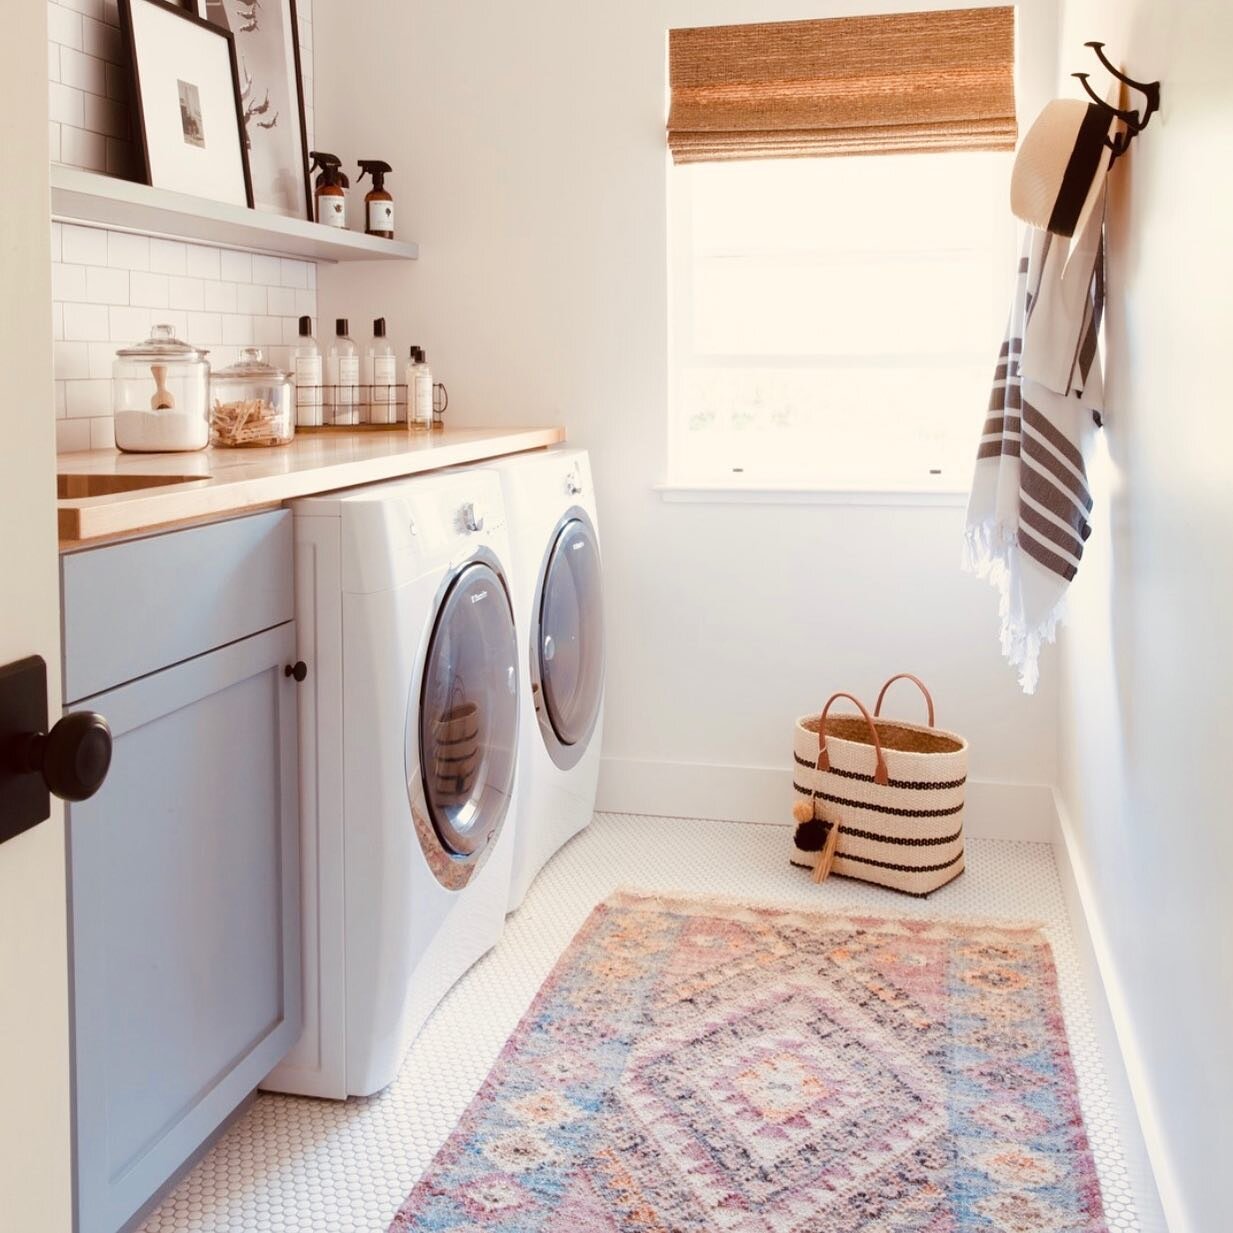 #repost @mindygayerdesign 

My laundry &ldquo;room&rdquo; has been in the garage for the last way-too-many years. However, in my new house, there is a dedicated laundry room...inside right next to my bedroom!

It may seem silly, but the laundry room 